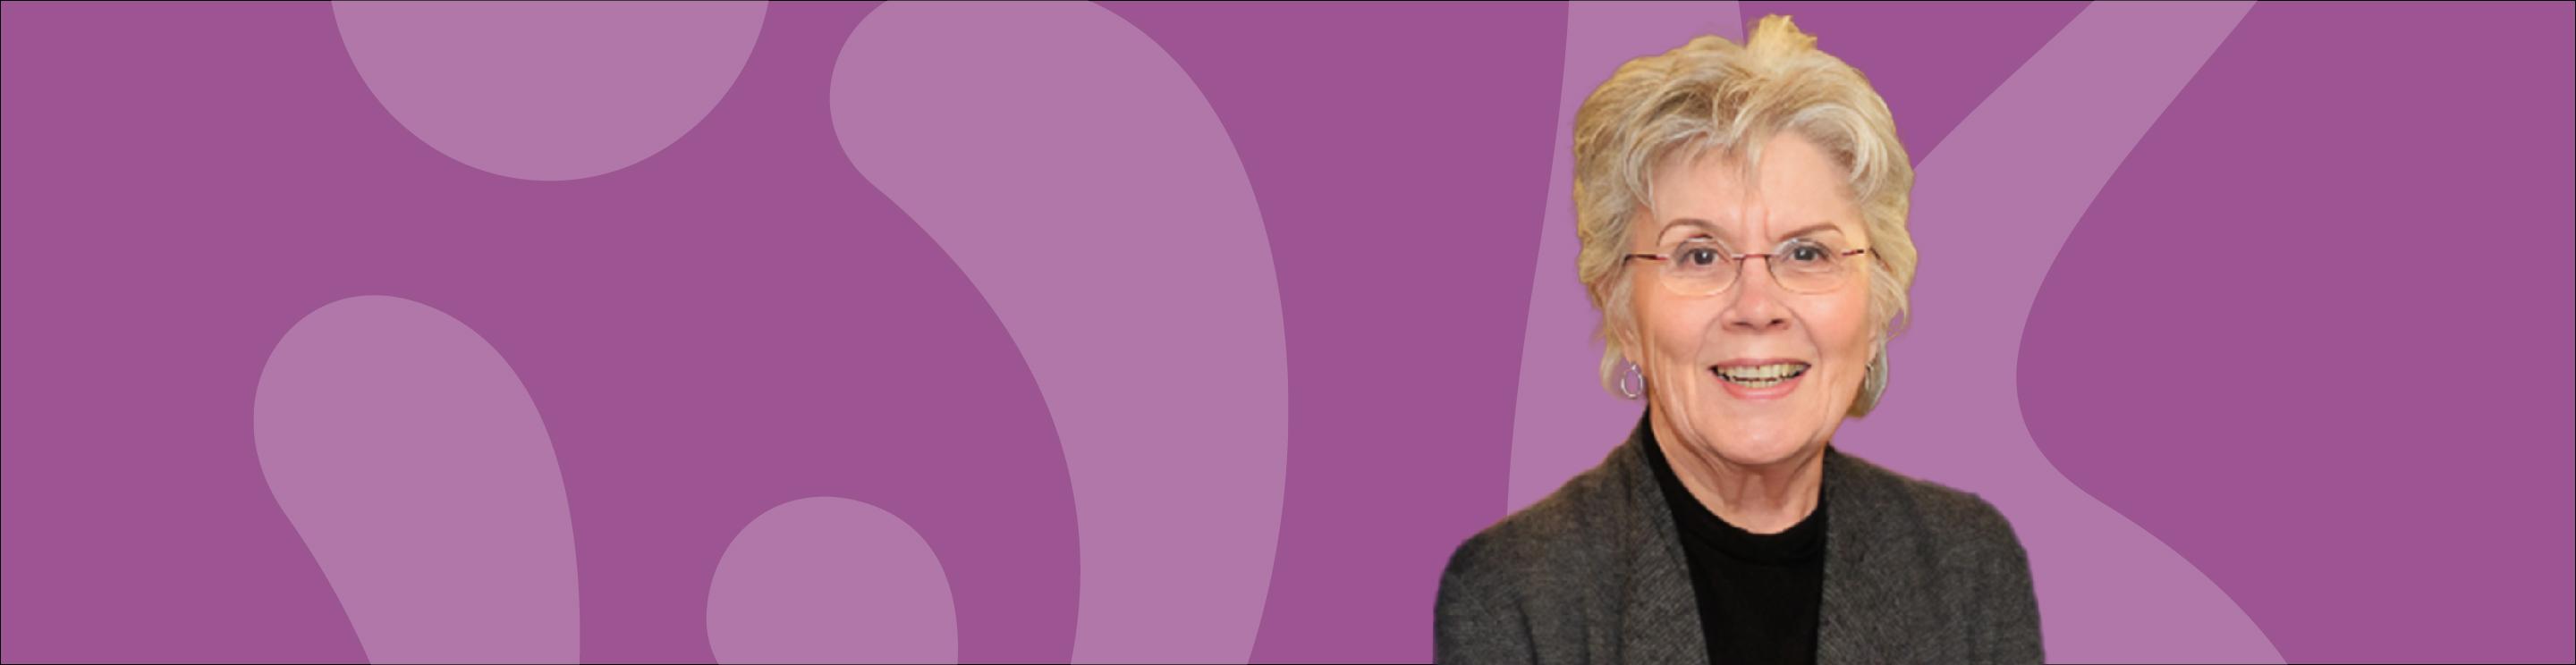 Photo of Carol Young on a purple background with light purple outlines of the W and K symbols from the IWK logo